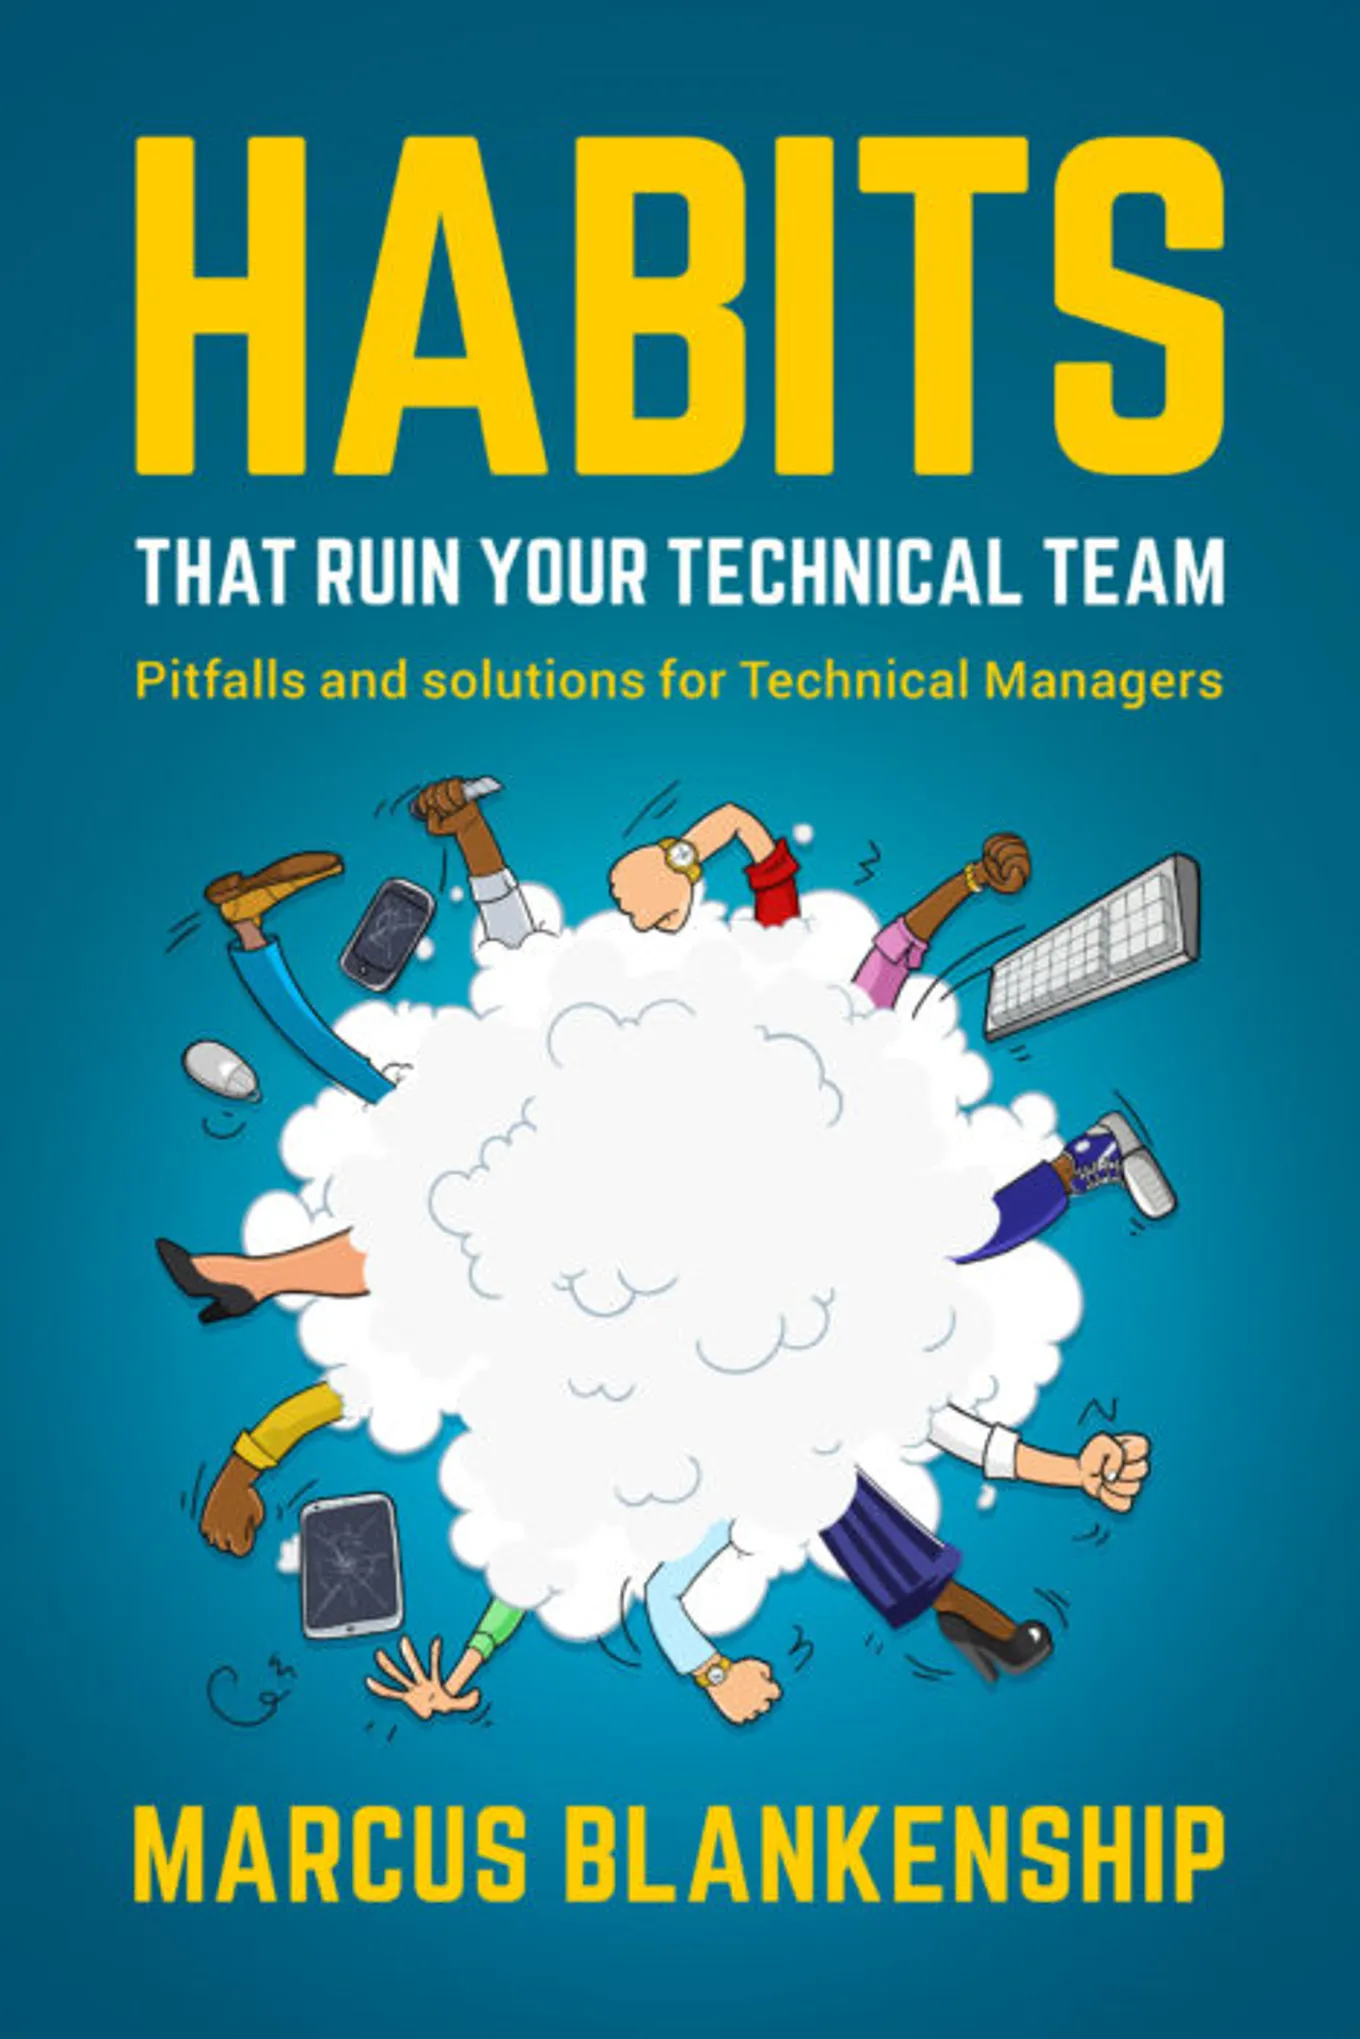 Habits that ruin your technical Team – Marcus Blankenship